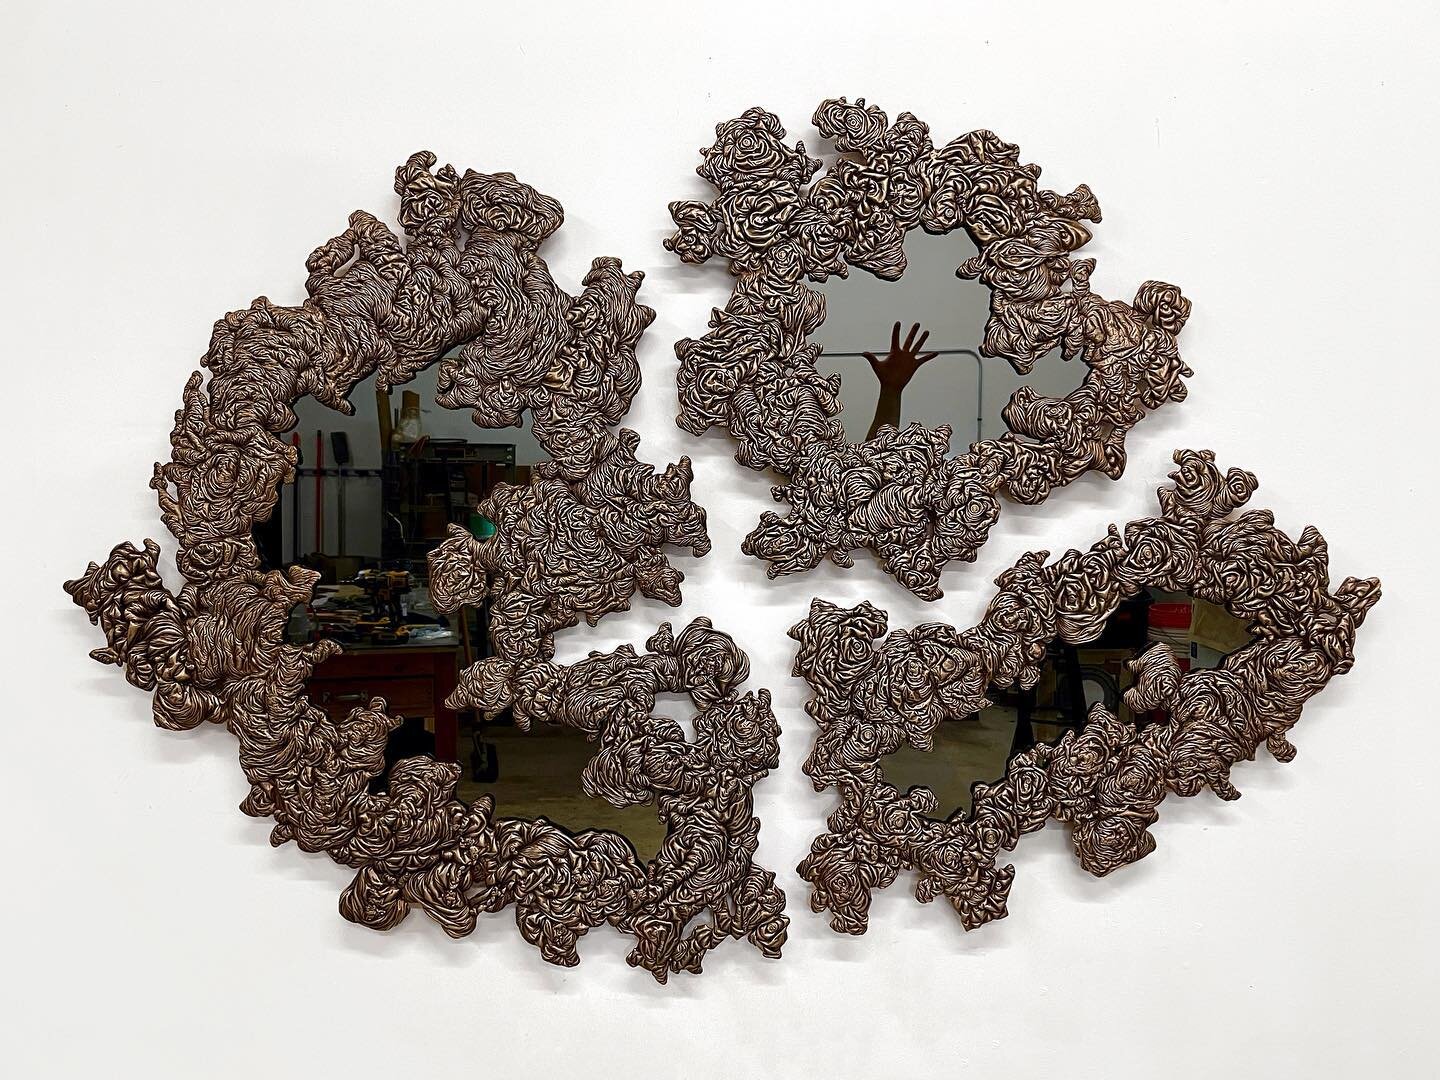 Unique ICB Freeform Mirror set commissioned earlier this year. #icecastbronze #icbfreeformmirror #commissions #unique #collectibledesign #castbronze